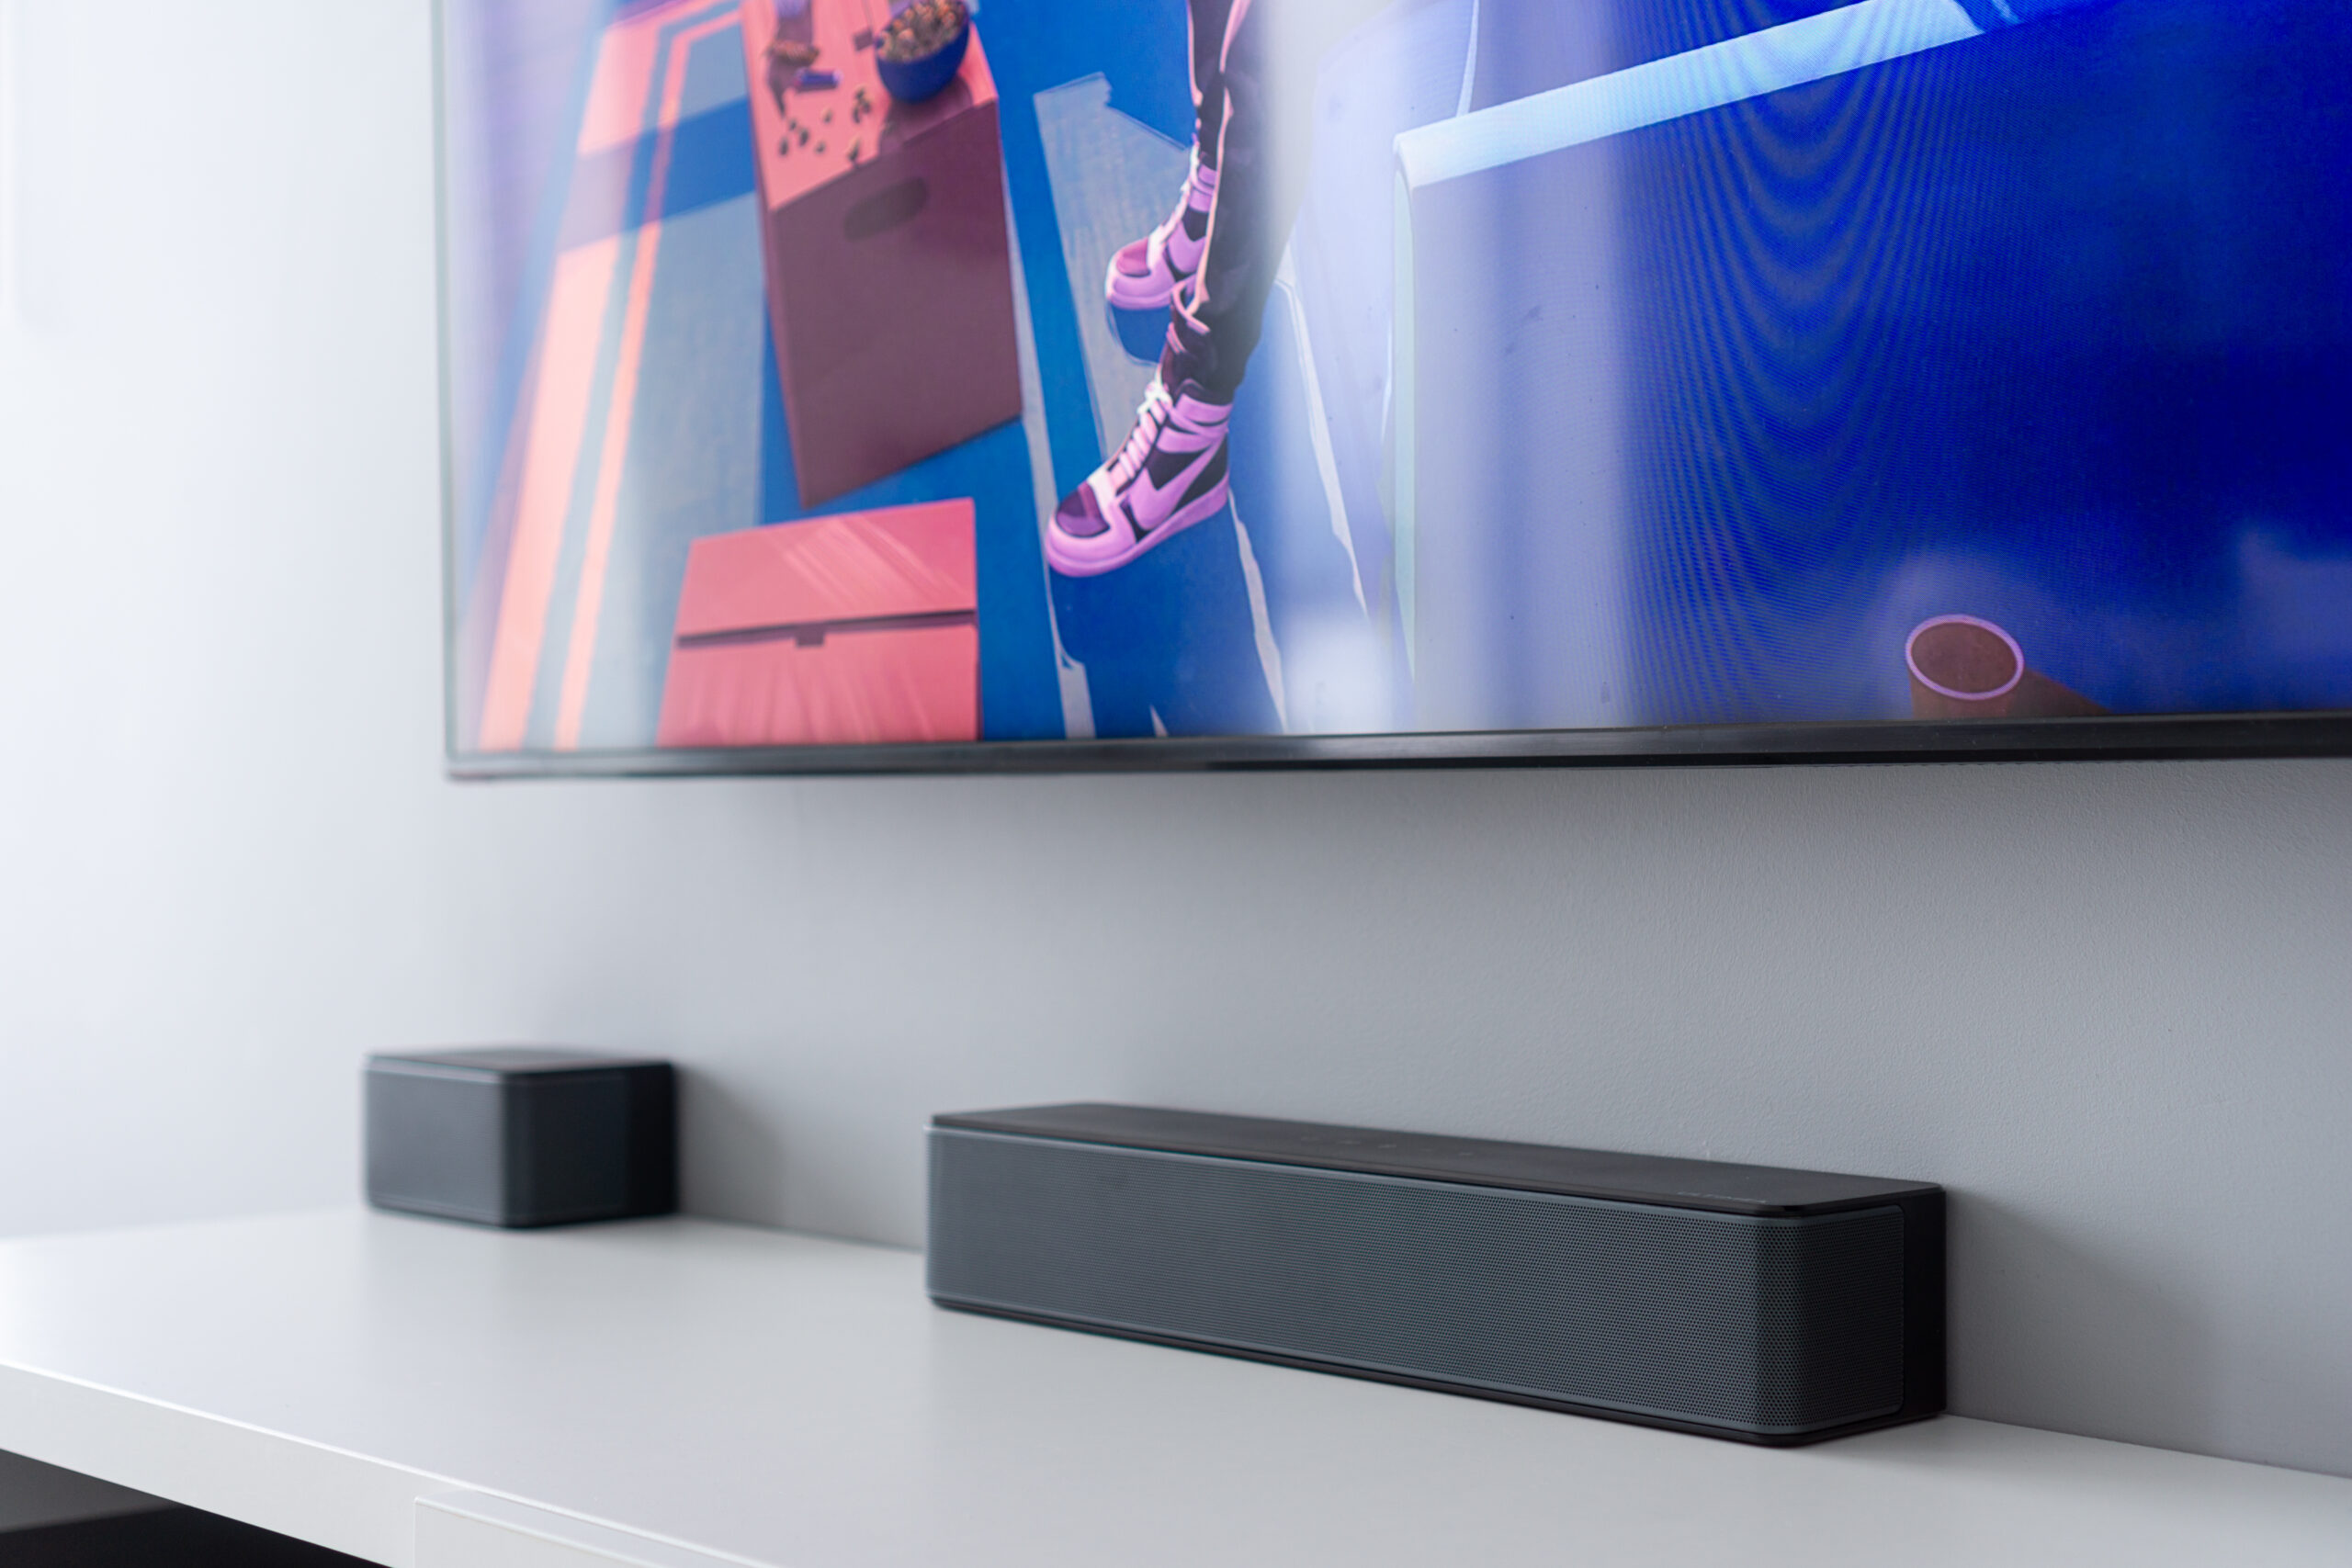 Ultimea Poseidon D60 surround sound system review - Upgrade your television  experience - The Gadgeteer